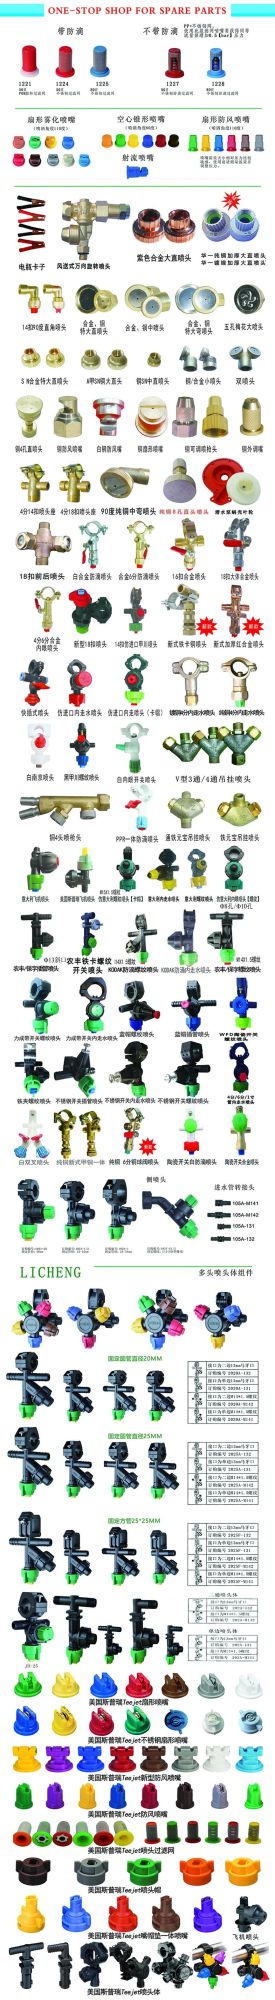 Full Cone Pressure Battery Electric Power Hand Drones Agricultural Sprayer Pump Nozzle